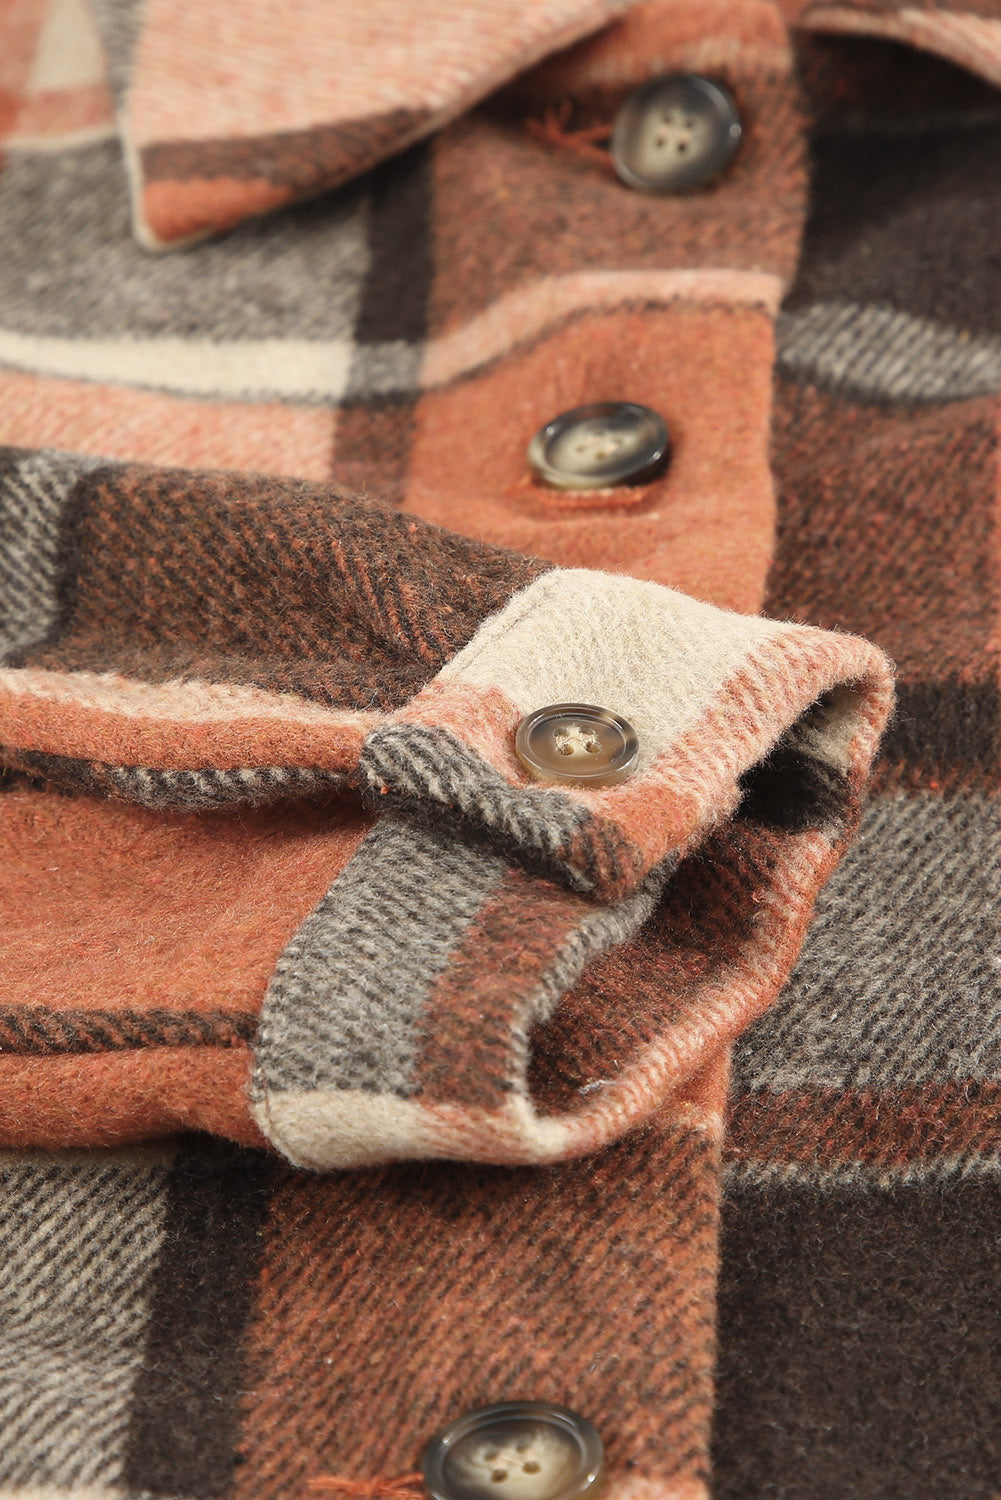 Brown Plaid Button Up Long Sleeve Flannel Shacket